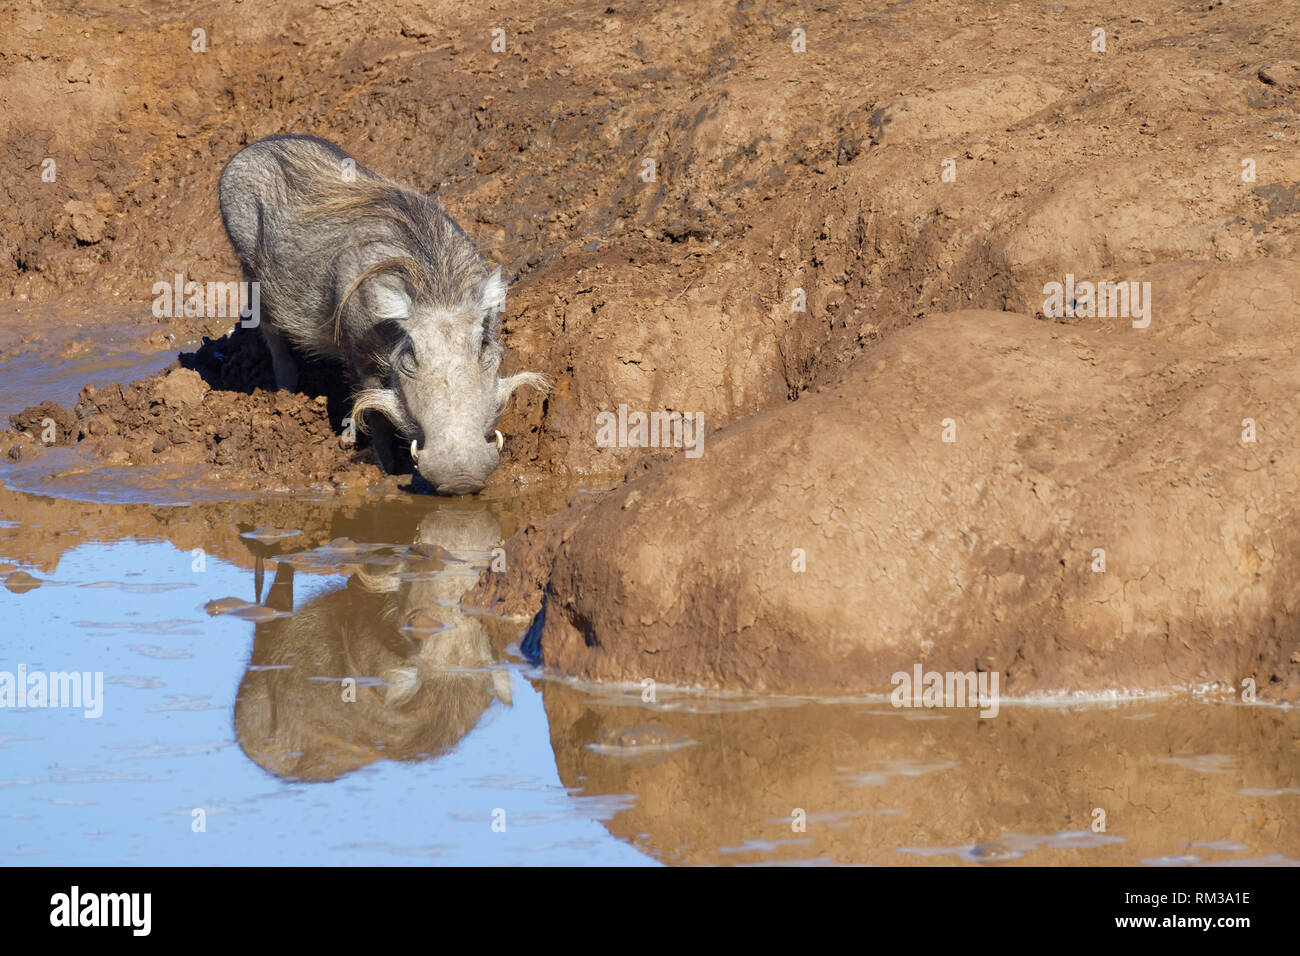 Common warthog (Phacochoerus africanus), adult, drinking at a waterhole, water reflection, Addo National Park, Eastern Cape, South Africa, Africa Stock Photo